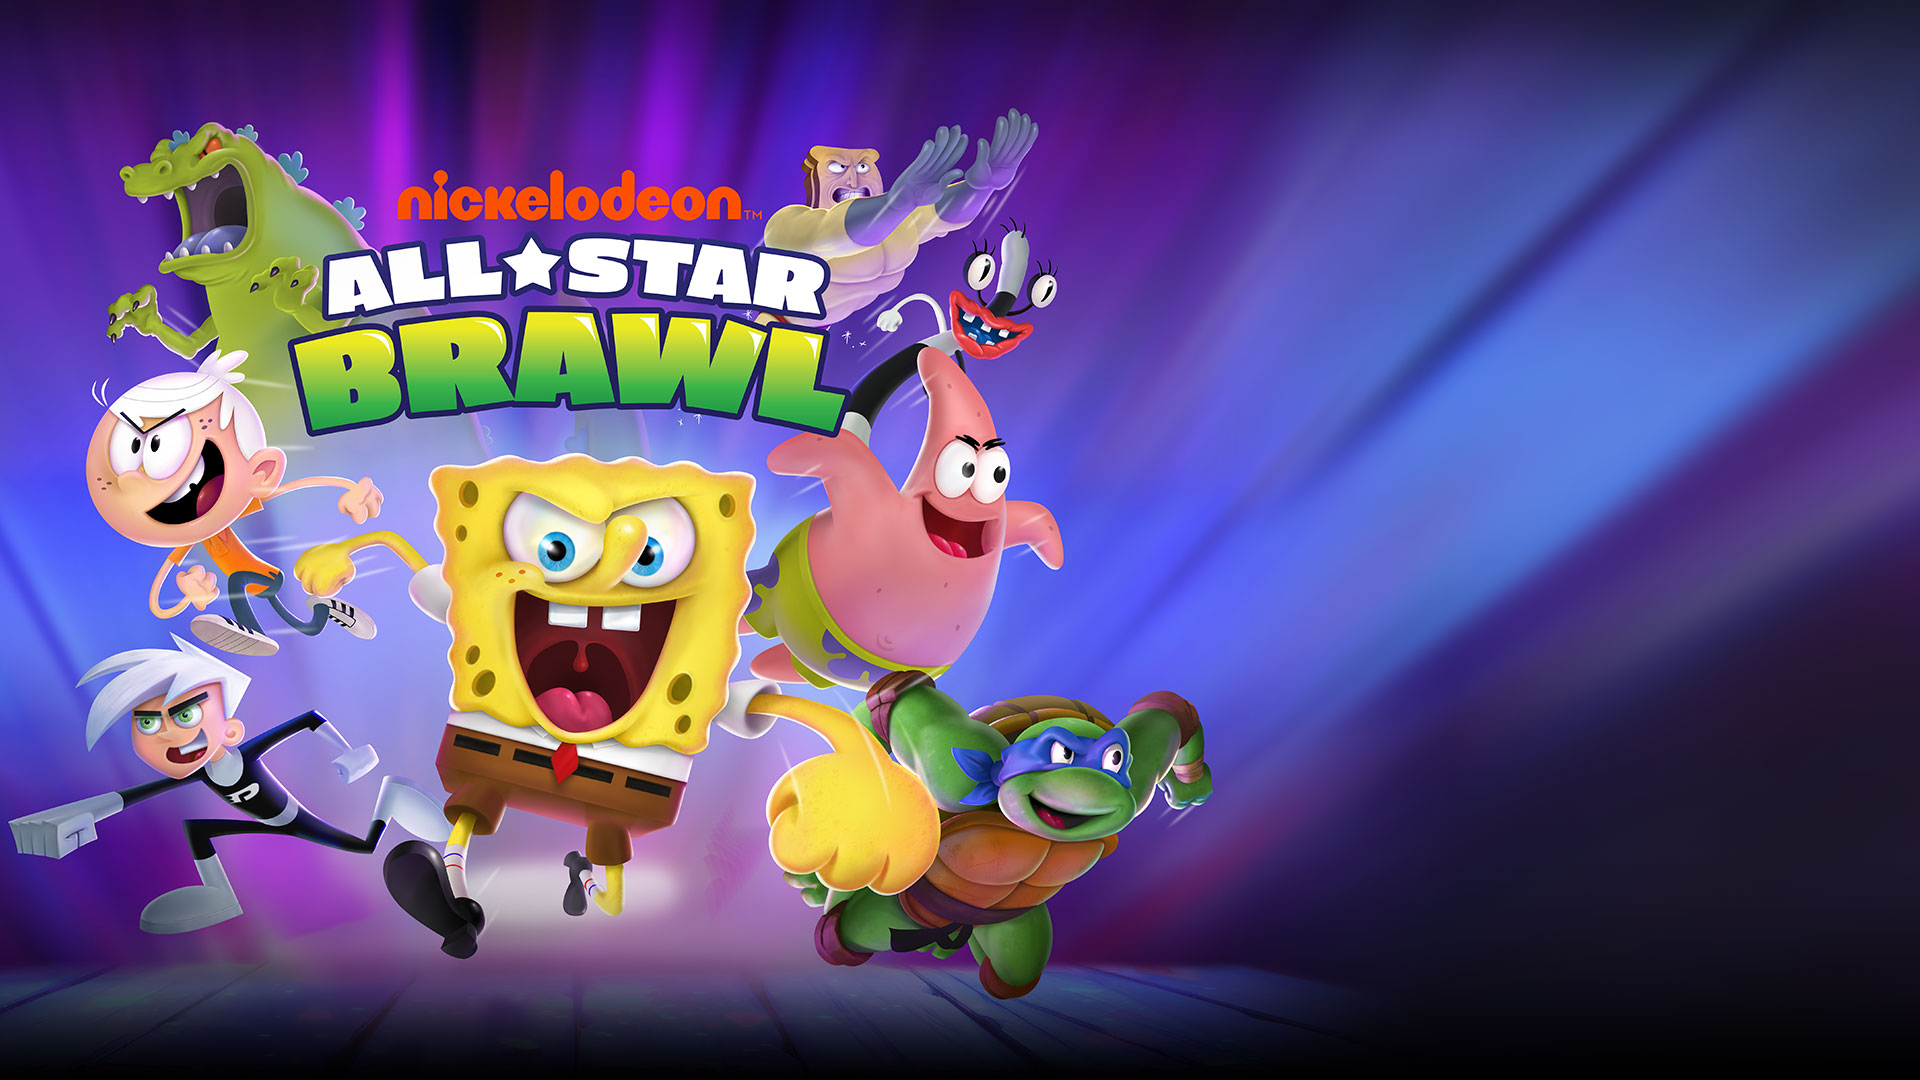 HD Wallpaper of Nickelodeon All-Star Brawl featuring animated characters SpongeBob, Patrick, and others with a vibrant background.